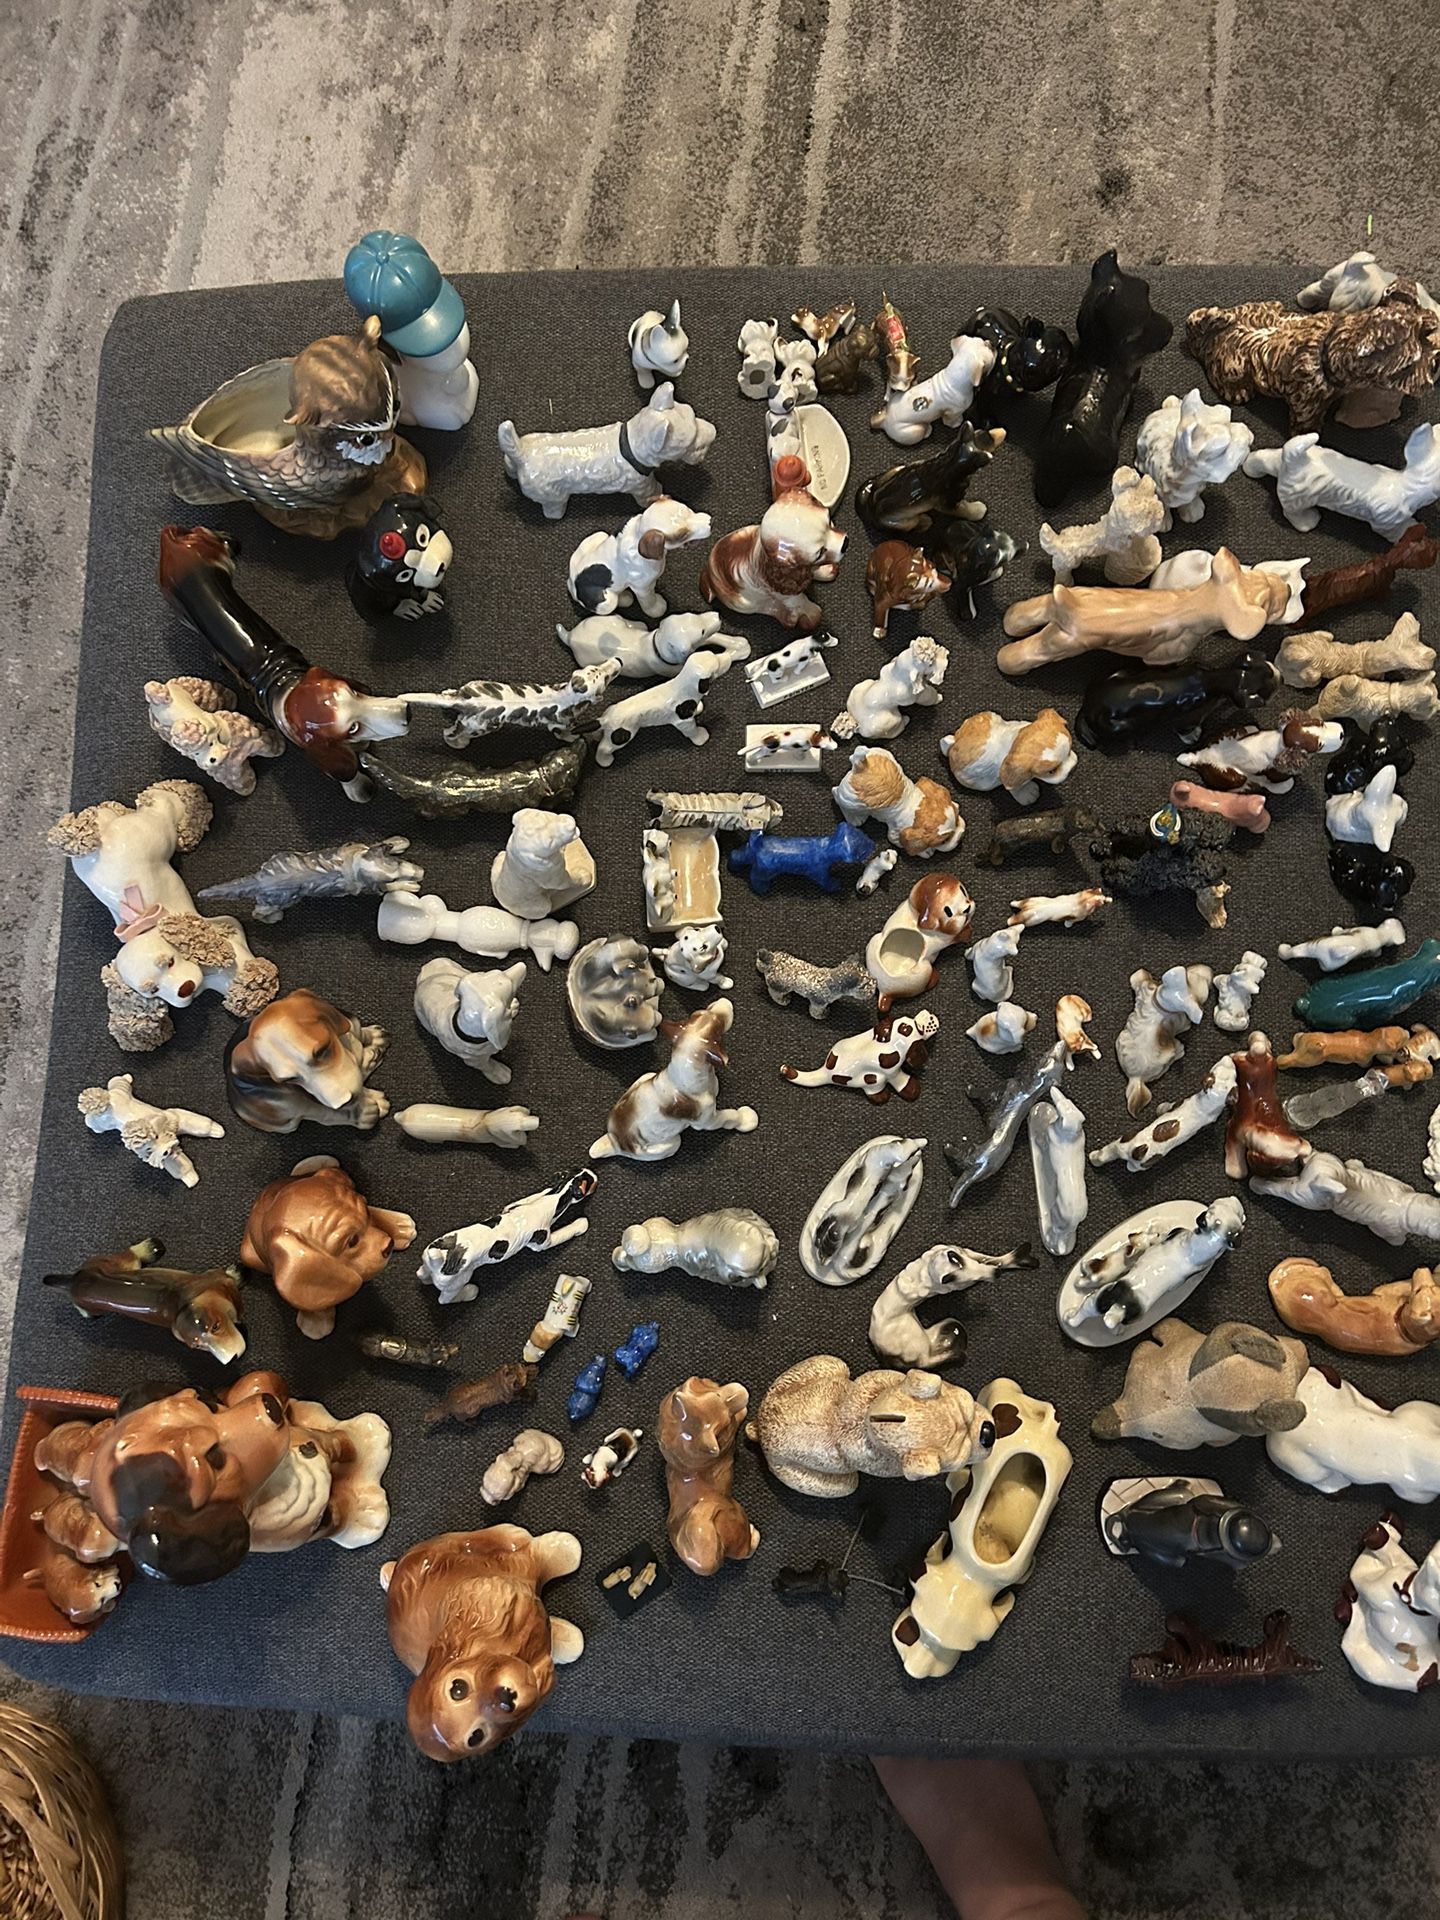 Antique Dog Figurines From 1950’s To 1970’s